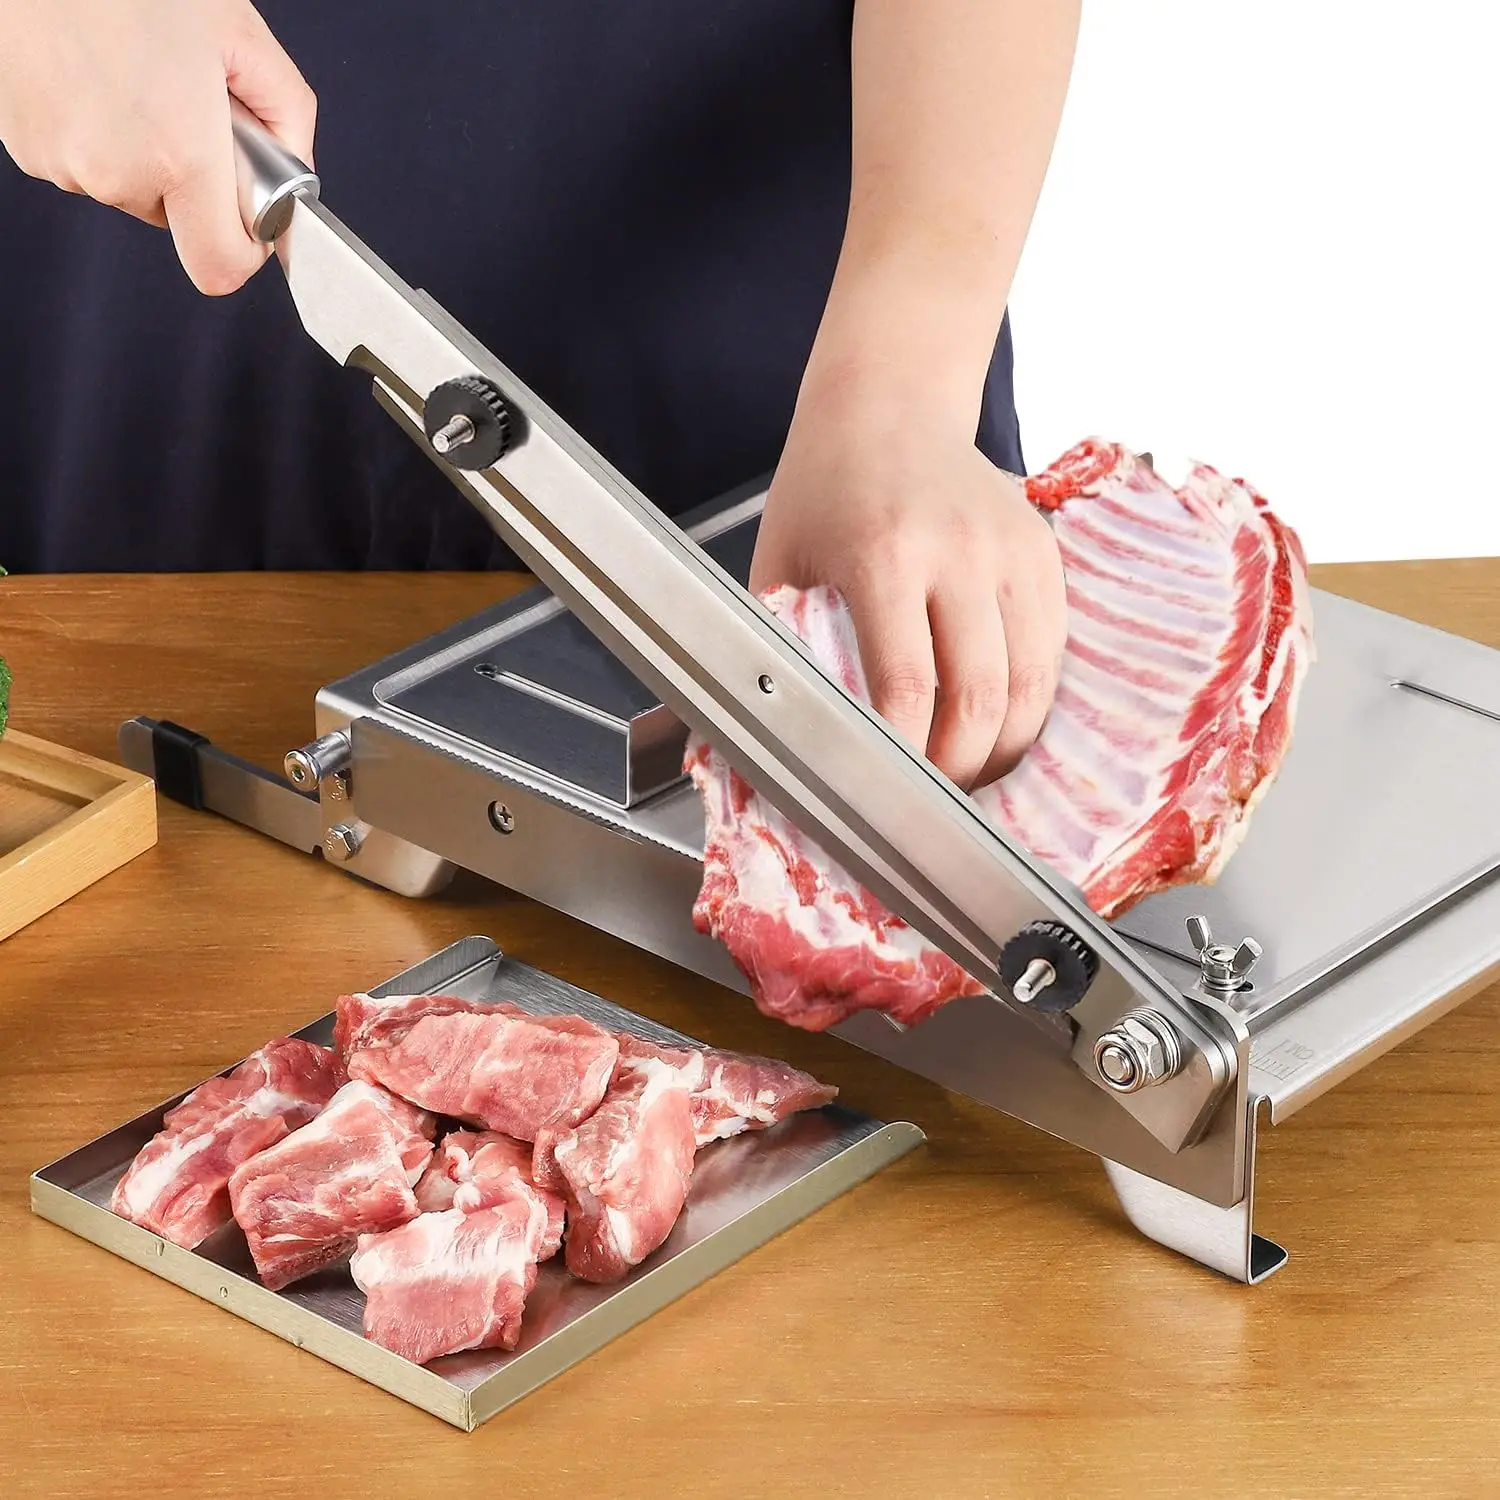 

BLADES Manual Ribs Meat Chopper Slicer Stainless Steel Hard Bone Cutter Beef Mutton Household Vegetable Food Slicer Slicing Mach